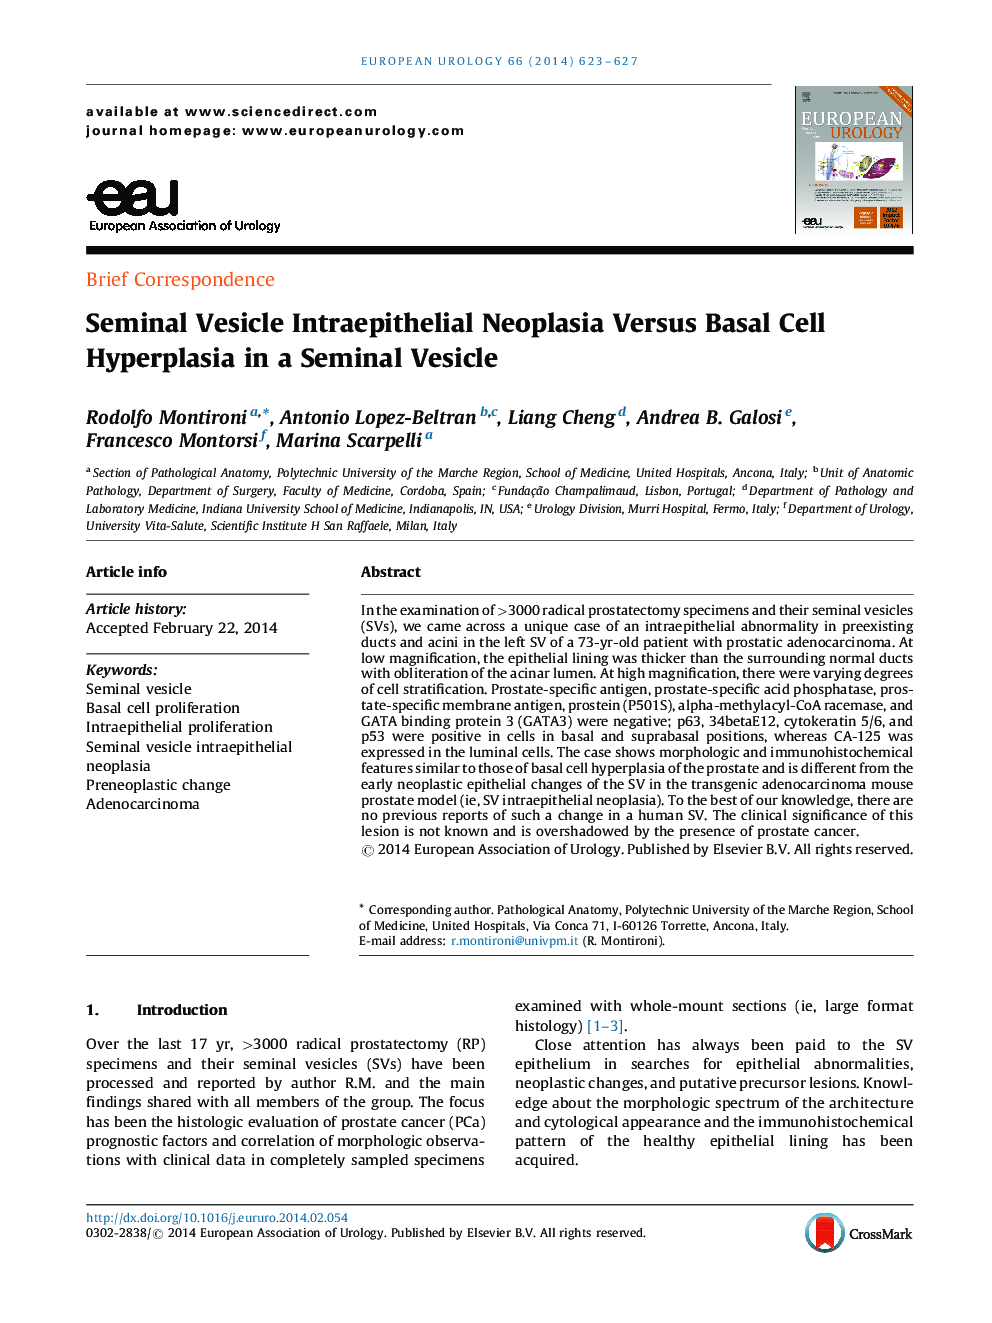 Seminal Vesicle Intraepithelial Neoplasia Versus Basal Cell Hyperplasia in a Seminal Vesicle